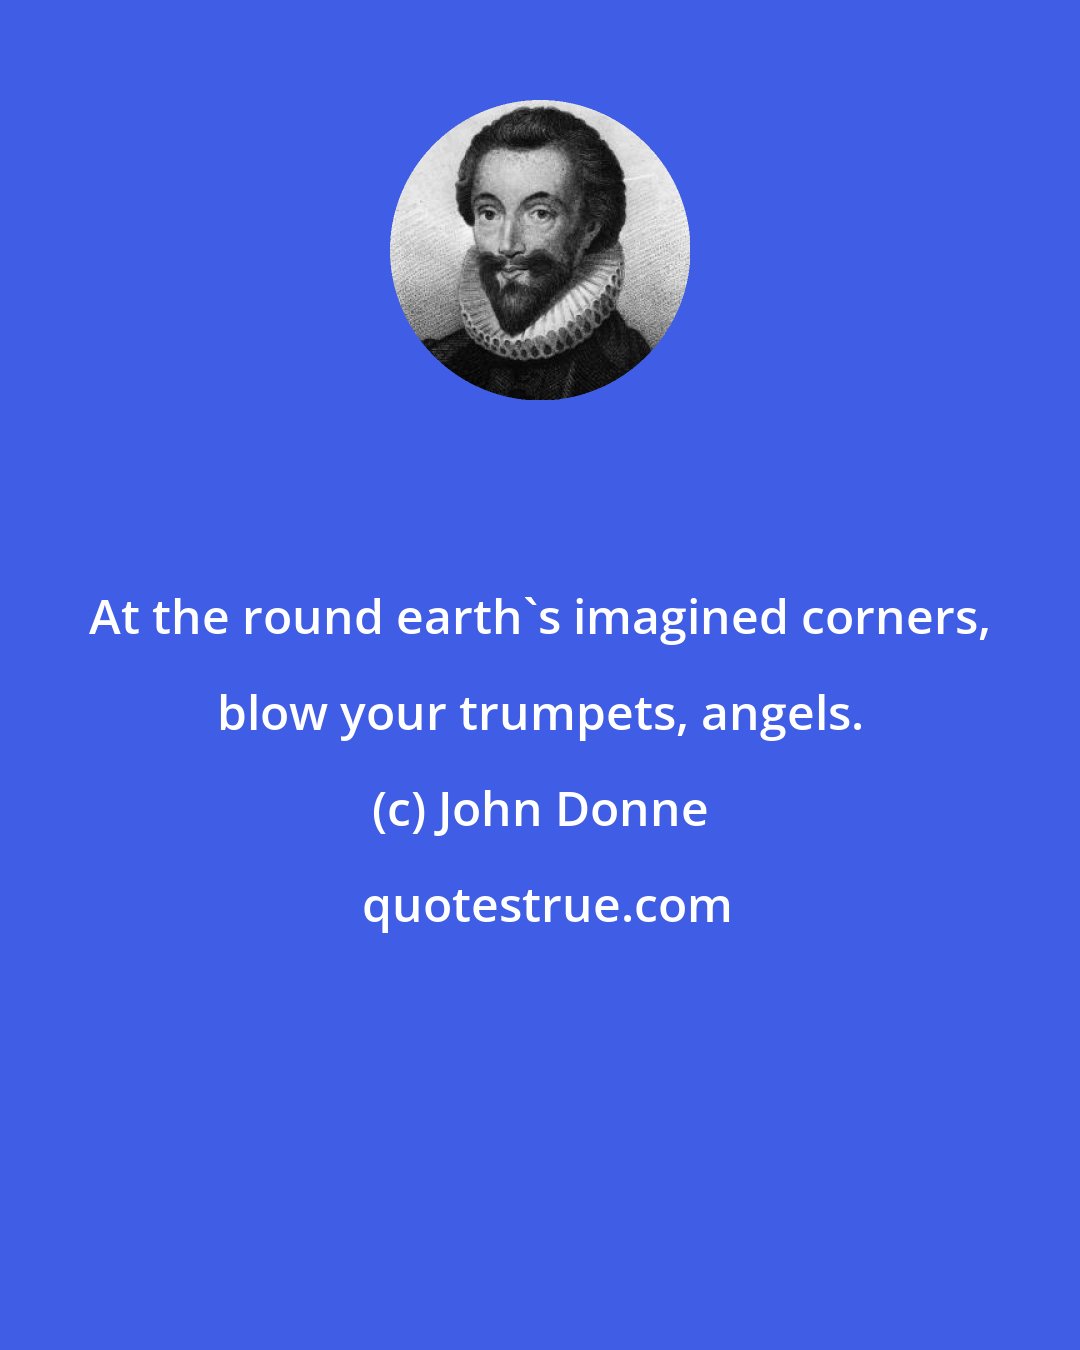 John Donne: At the round earth's imagined corners, blow your trumpets, angels.